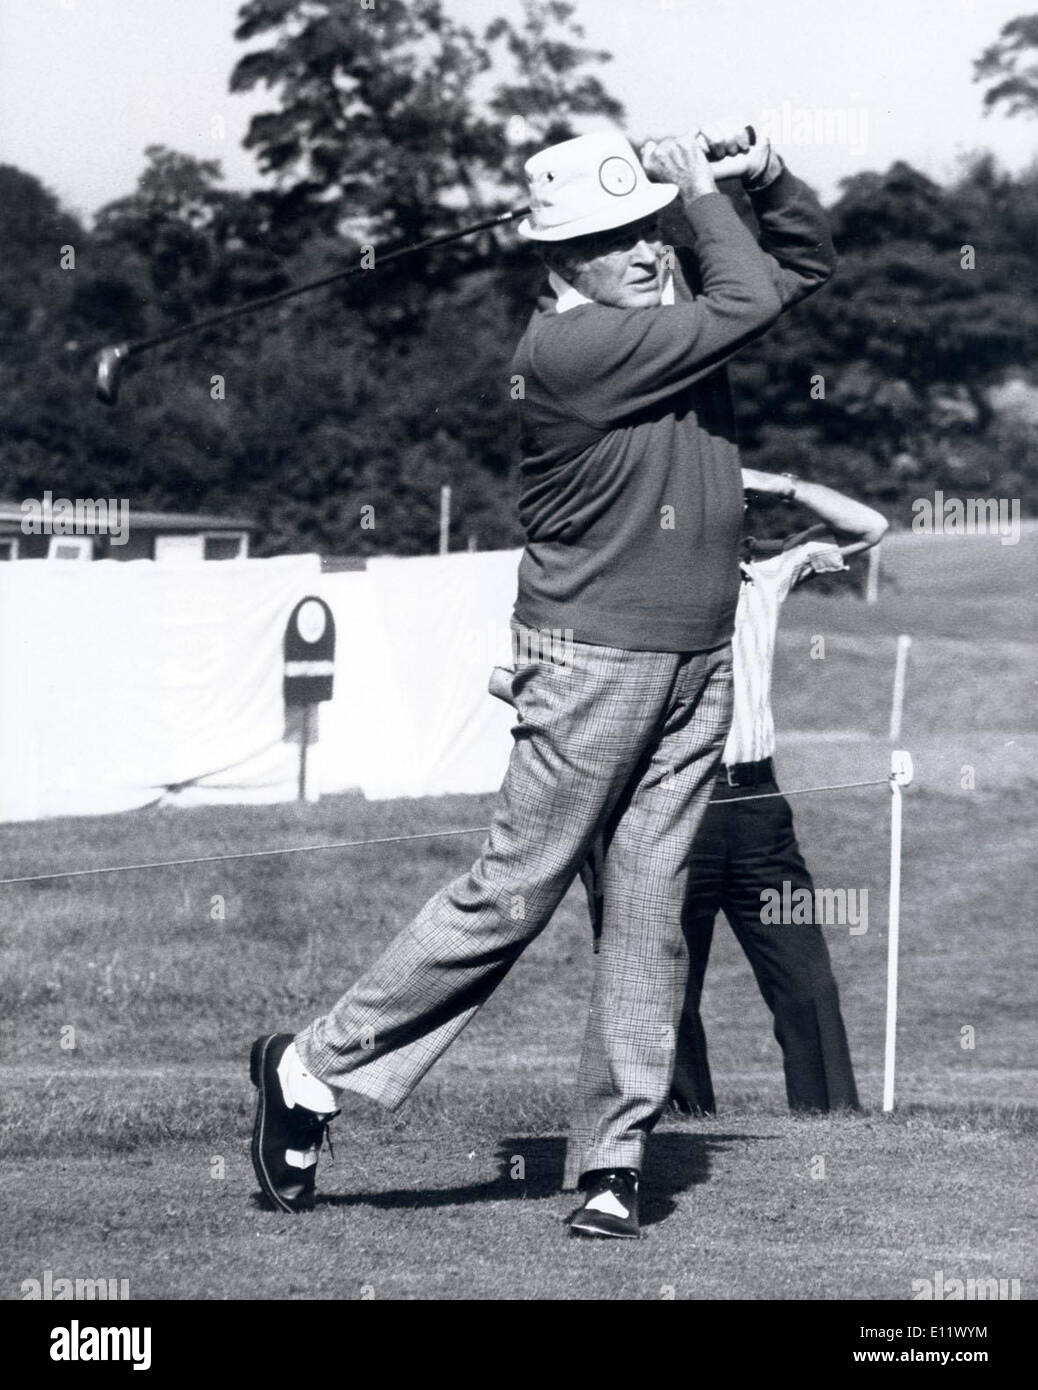 Sep 24, 1980 - Surrey, England, United Kingdom - BOB HOPE tees off during practice at the R.A.C. Country Club at Epsom. Hope is Stock Photo